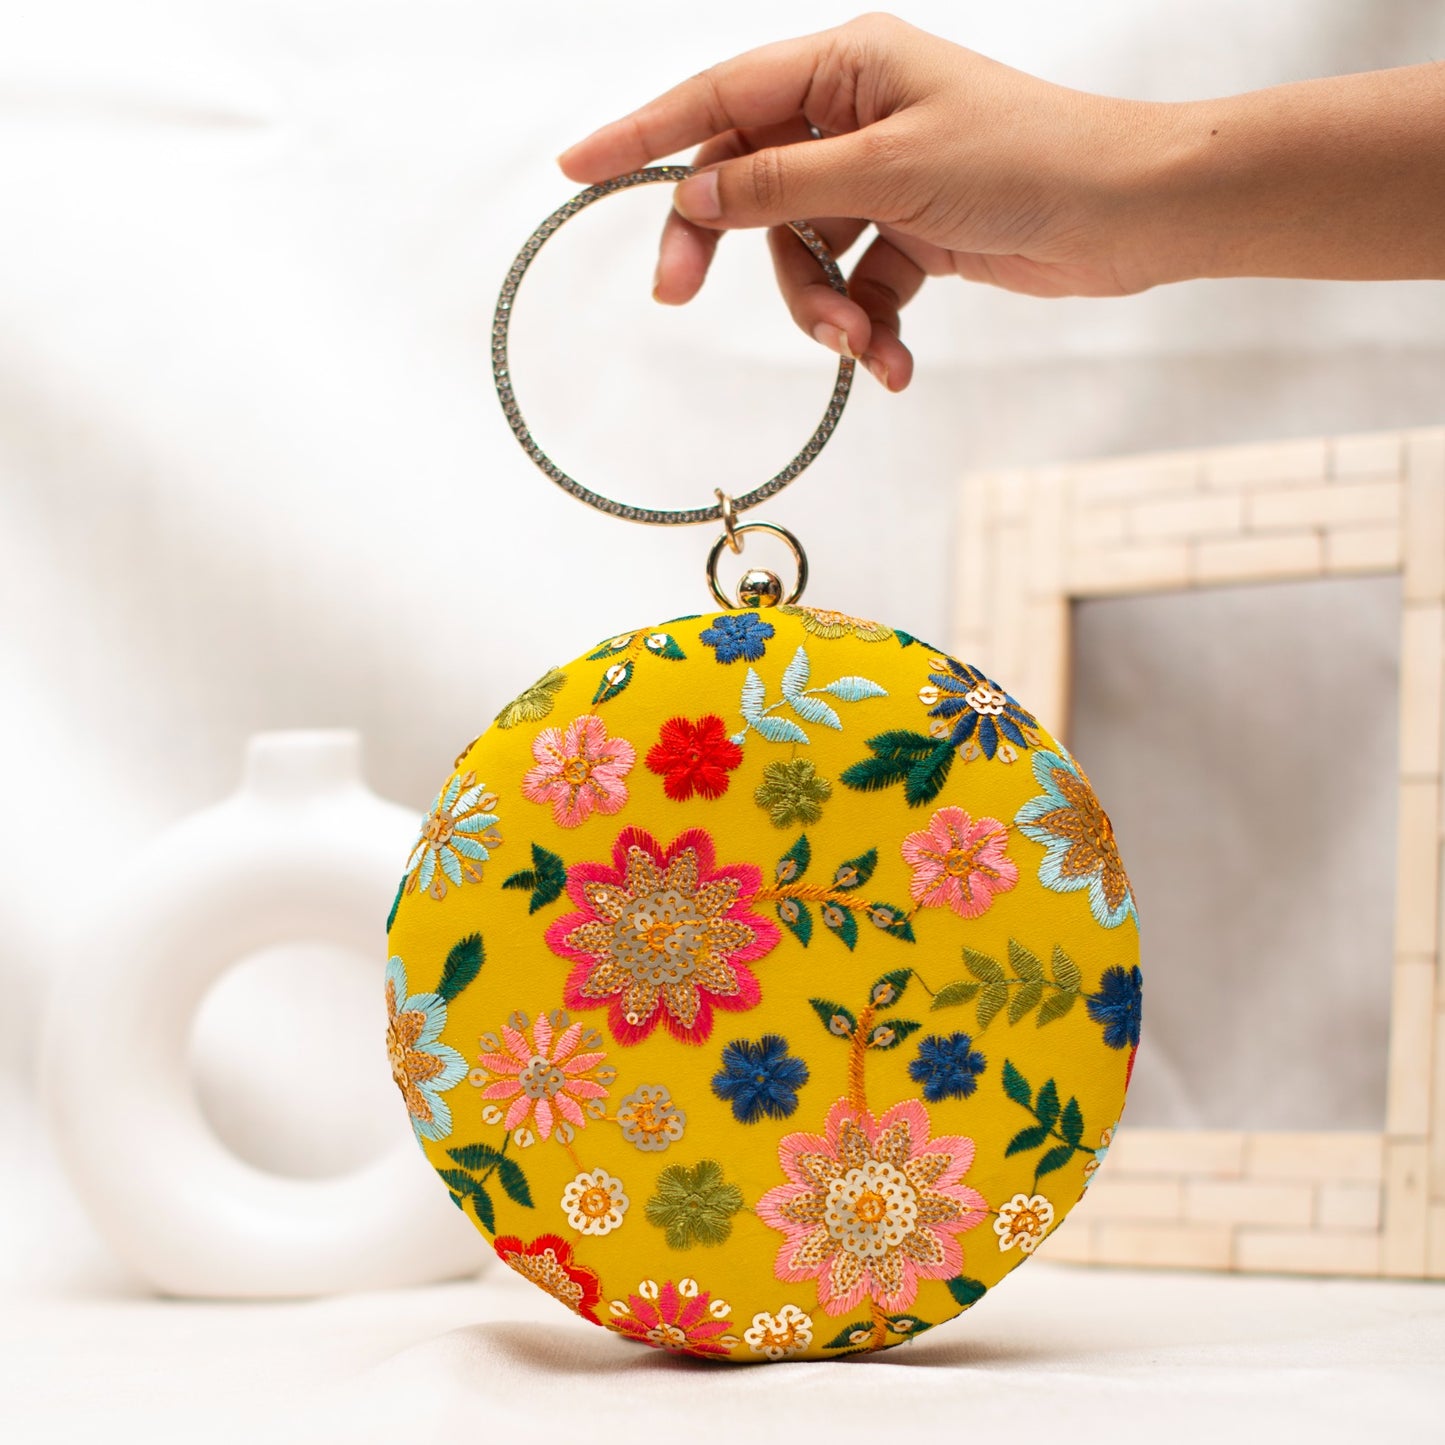 Floral Embroidery Round Bag